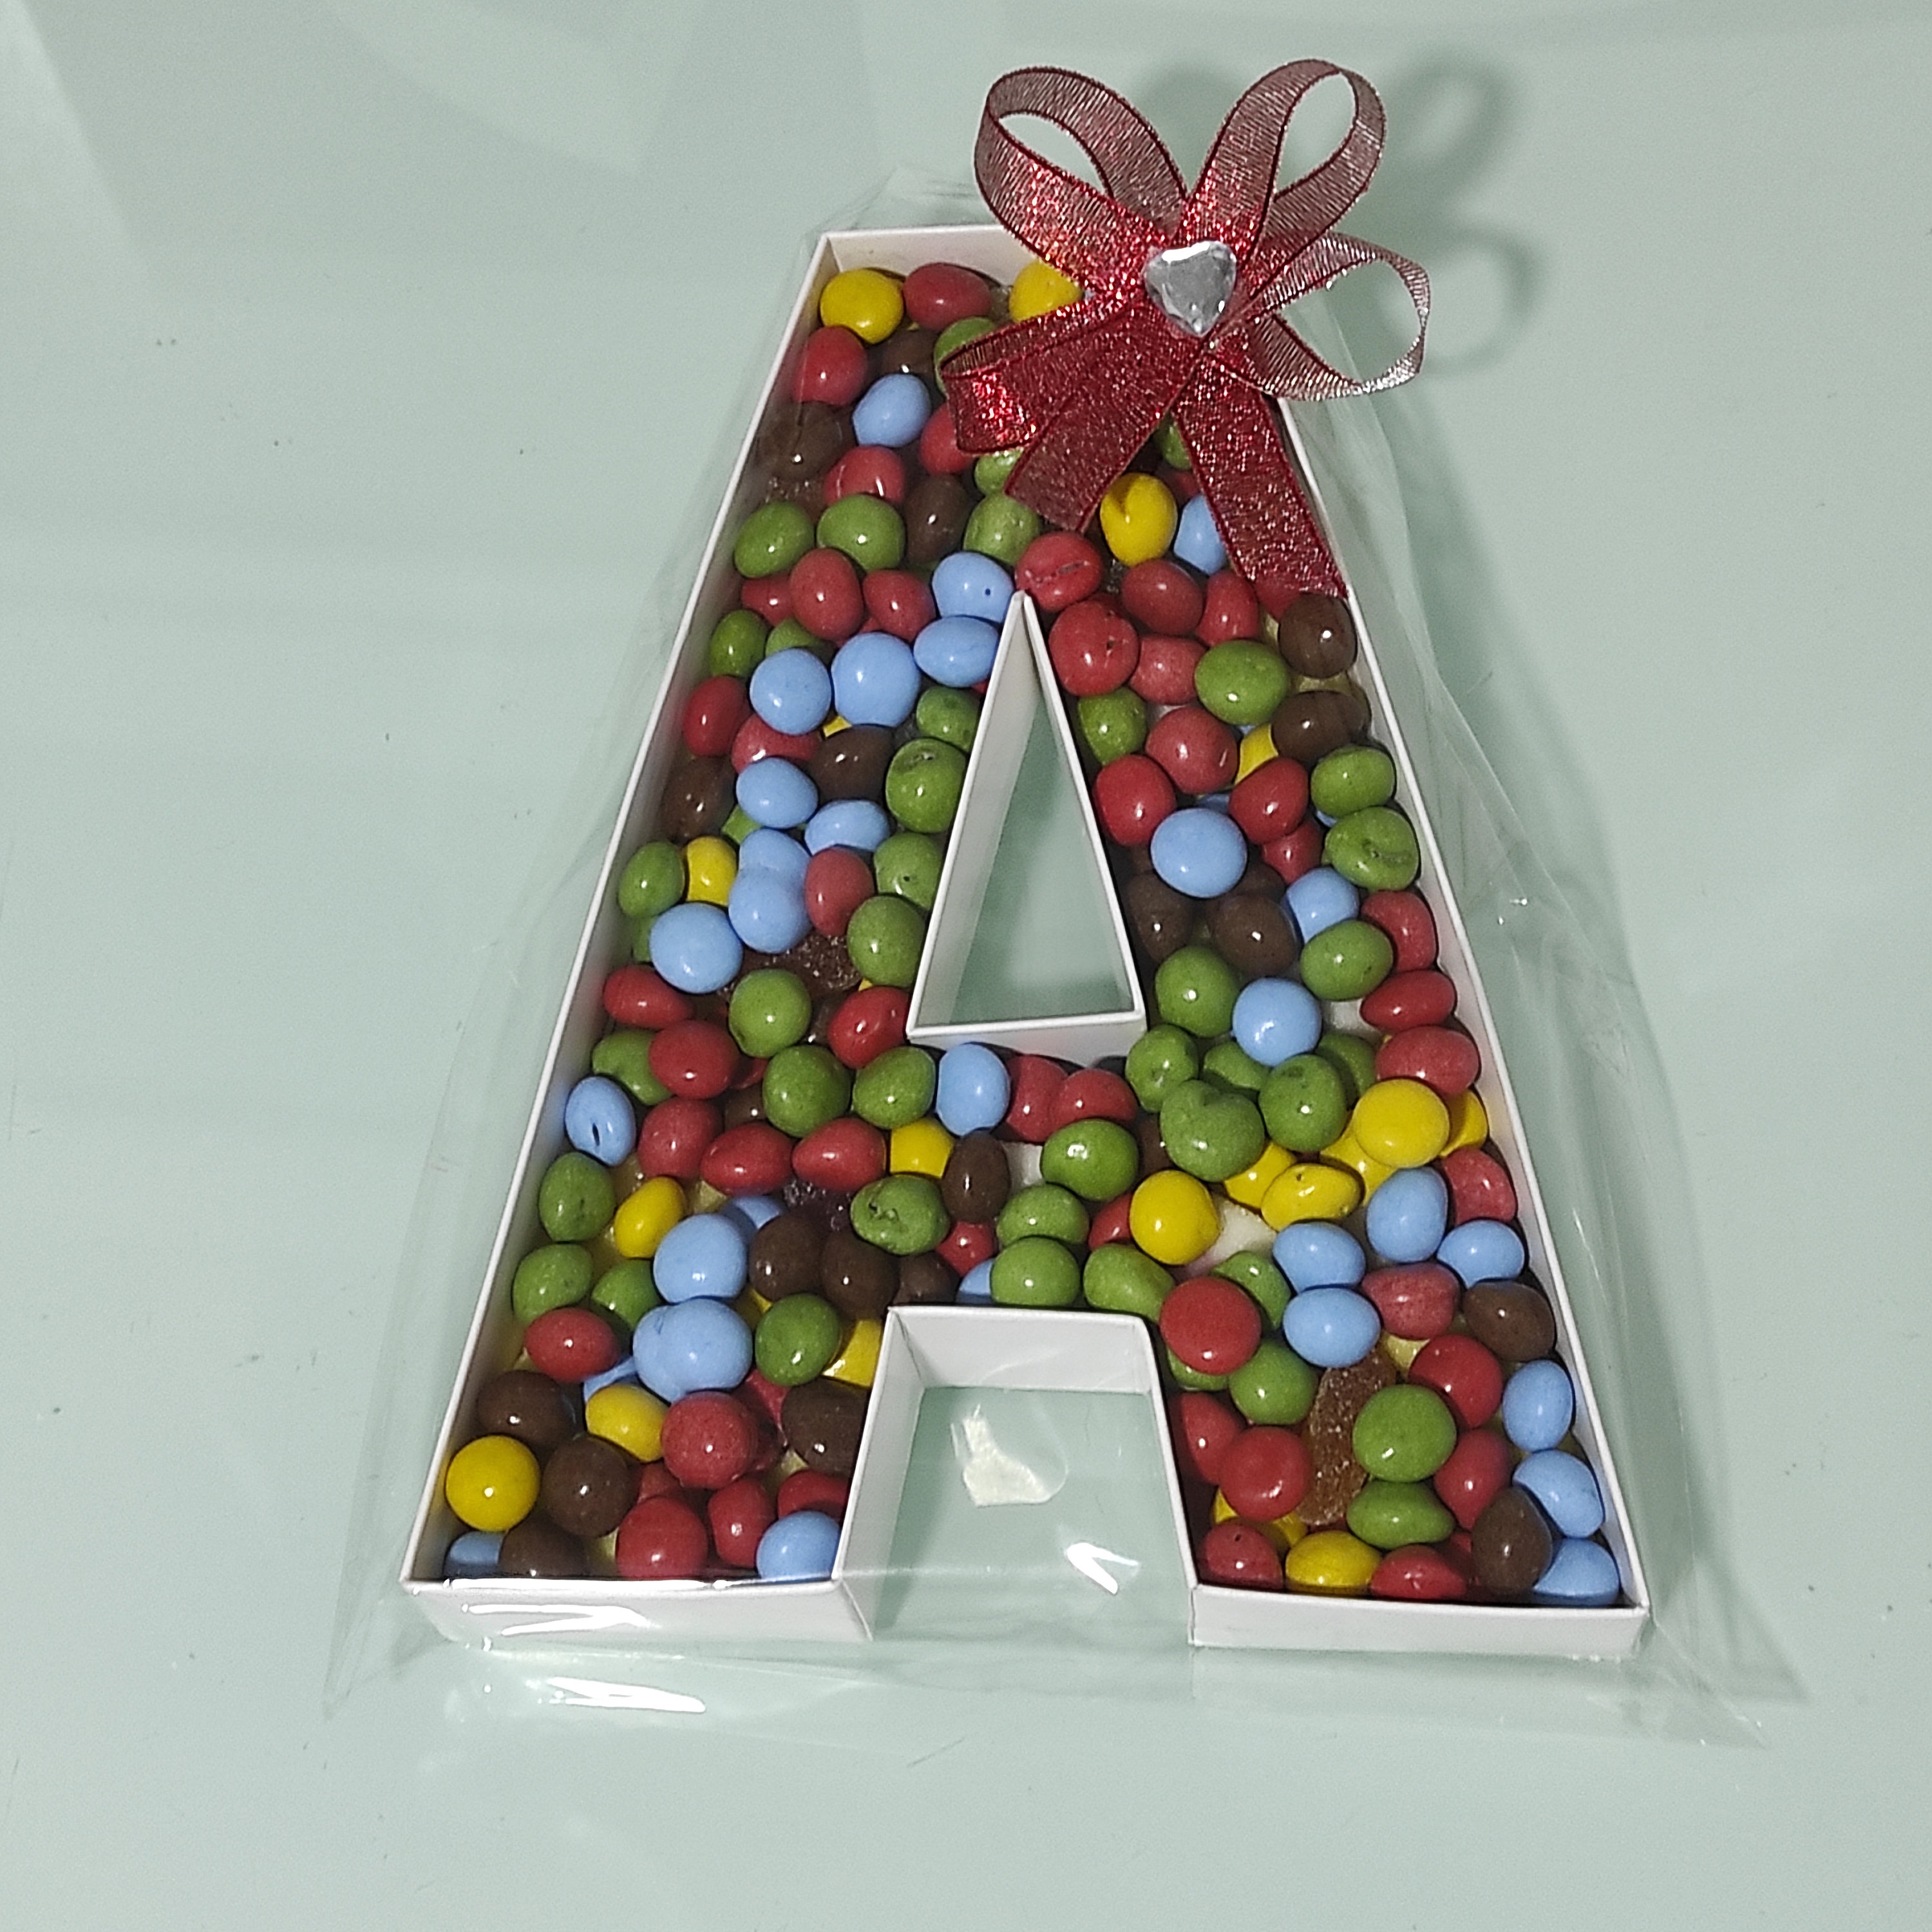 Clear Acrylic Fillable Letters at Rs 90/inch in Mumbai